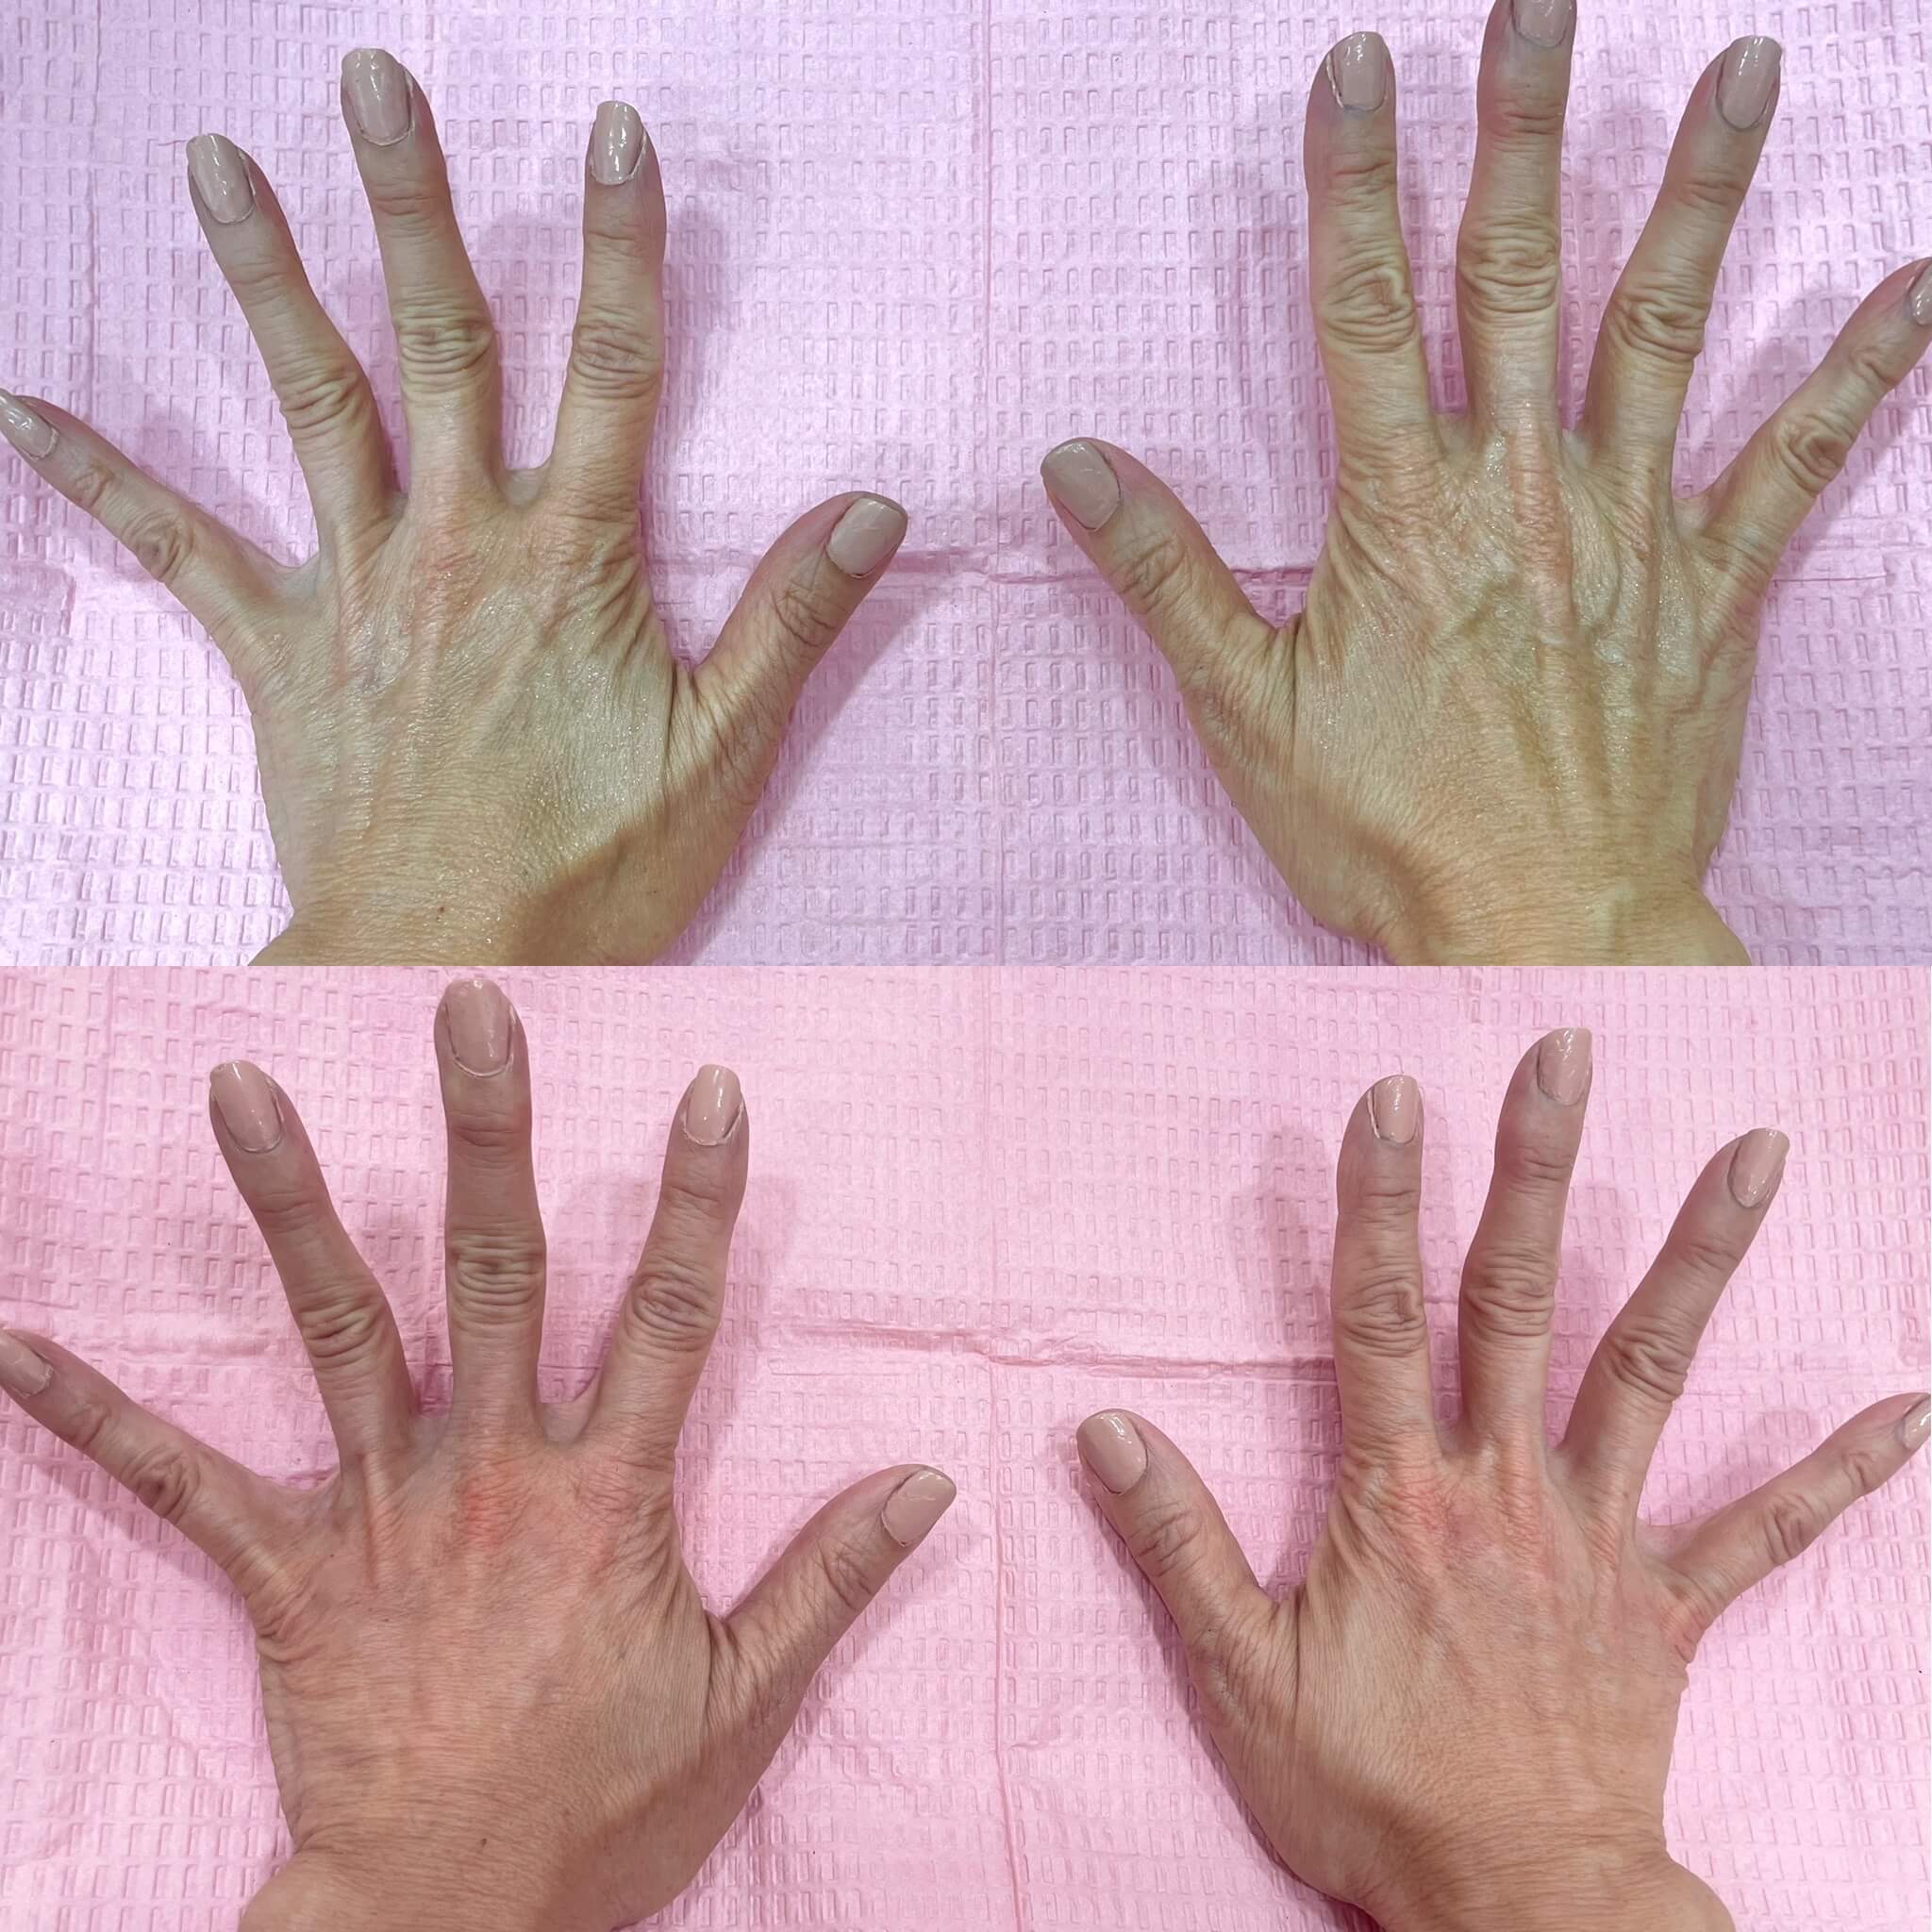 Before and After Fillers Treatment on Hands | Beauty Boost Med Spa in Newport Beach, CA